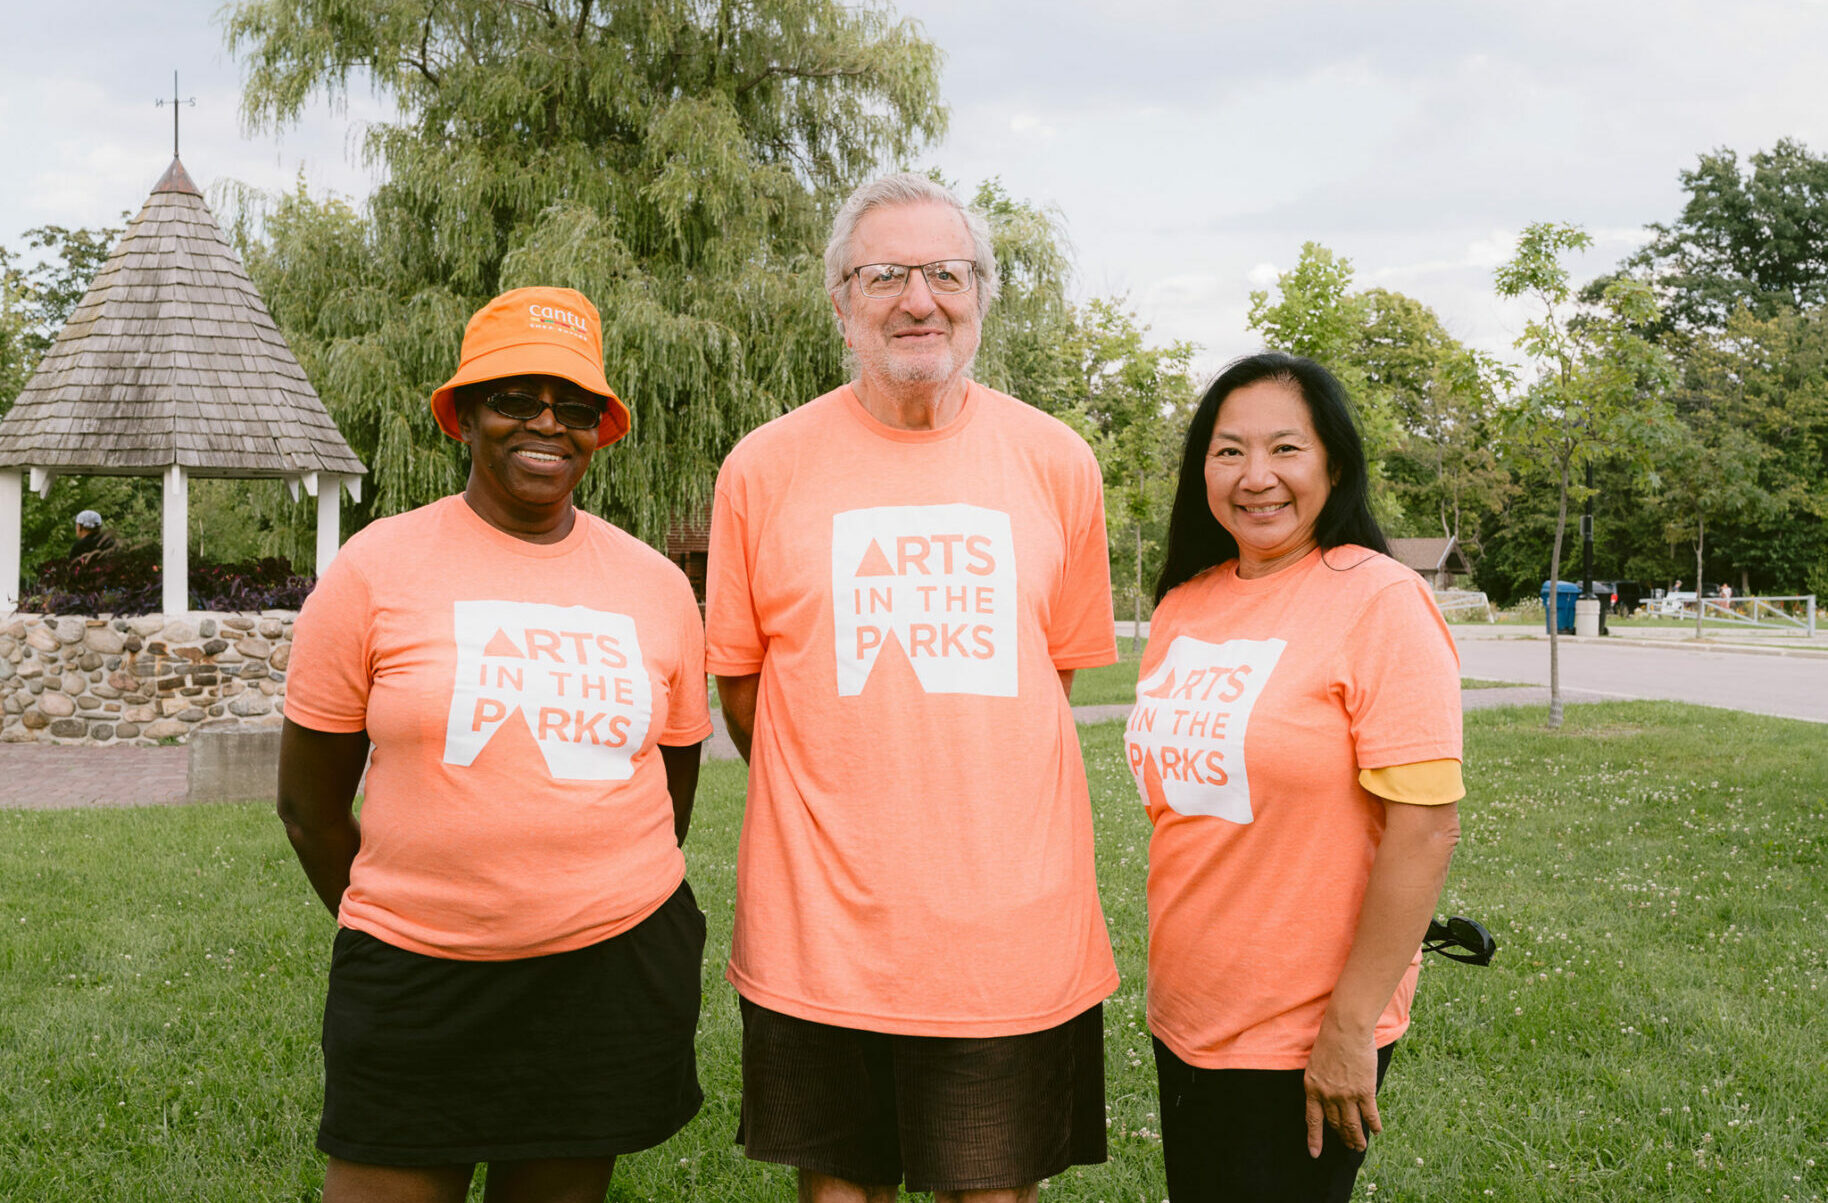 Three Arts in the Parks volunteers with orange t-shirts in the park.